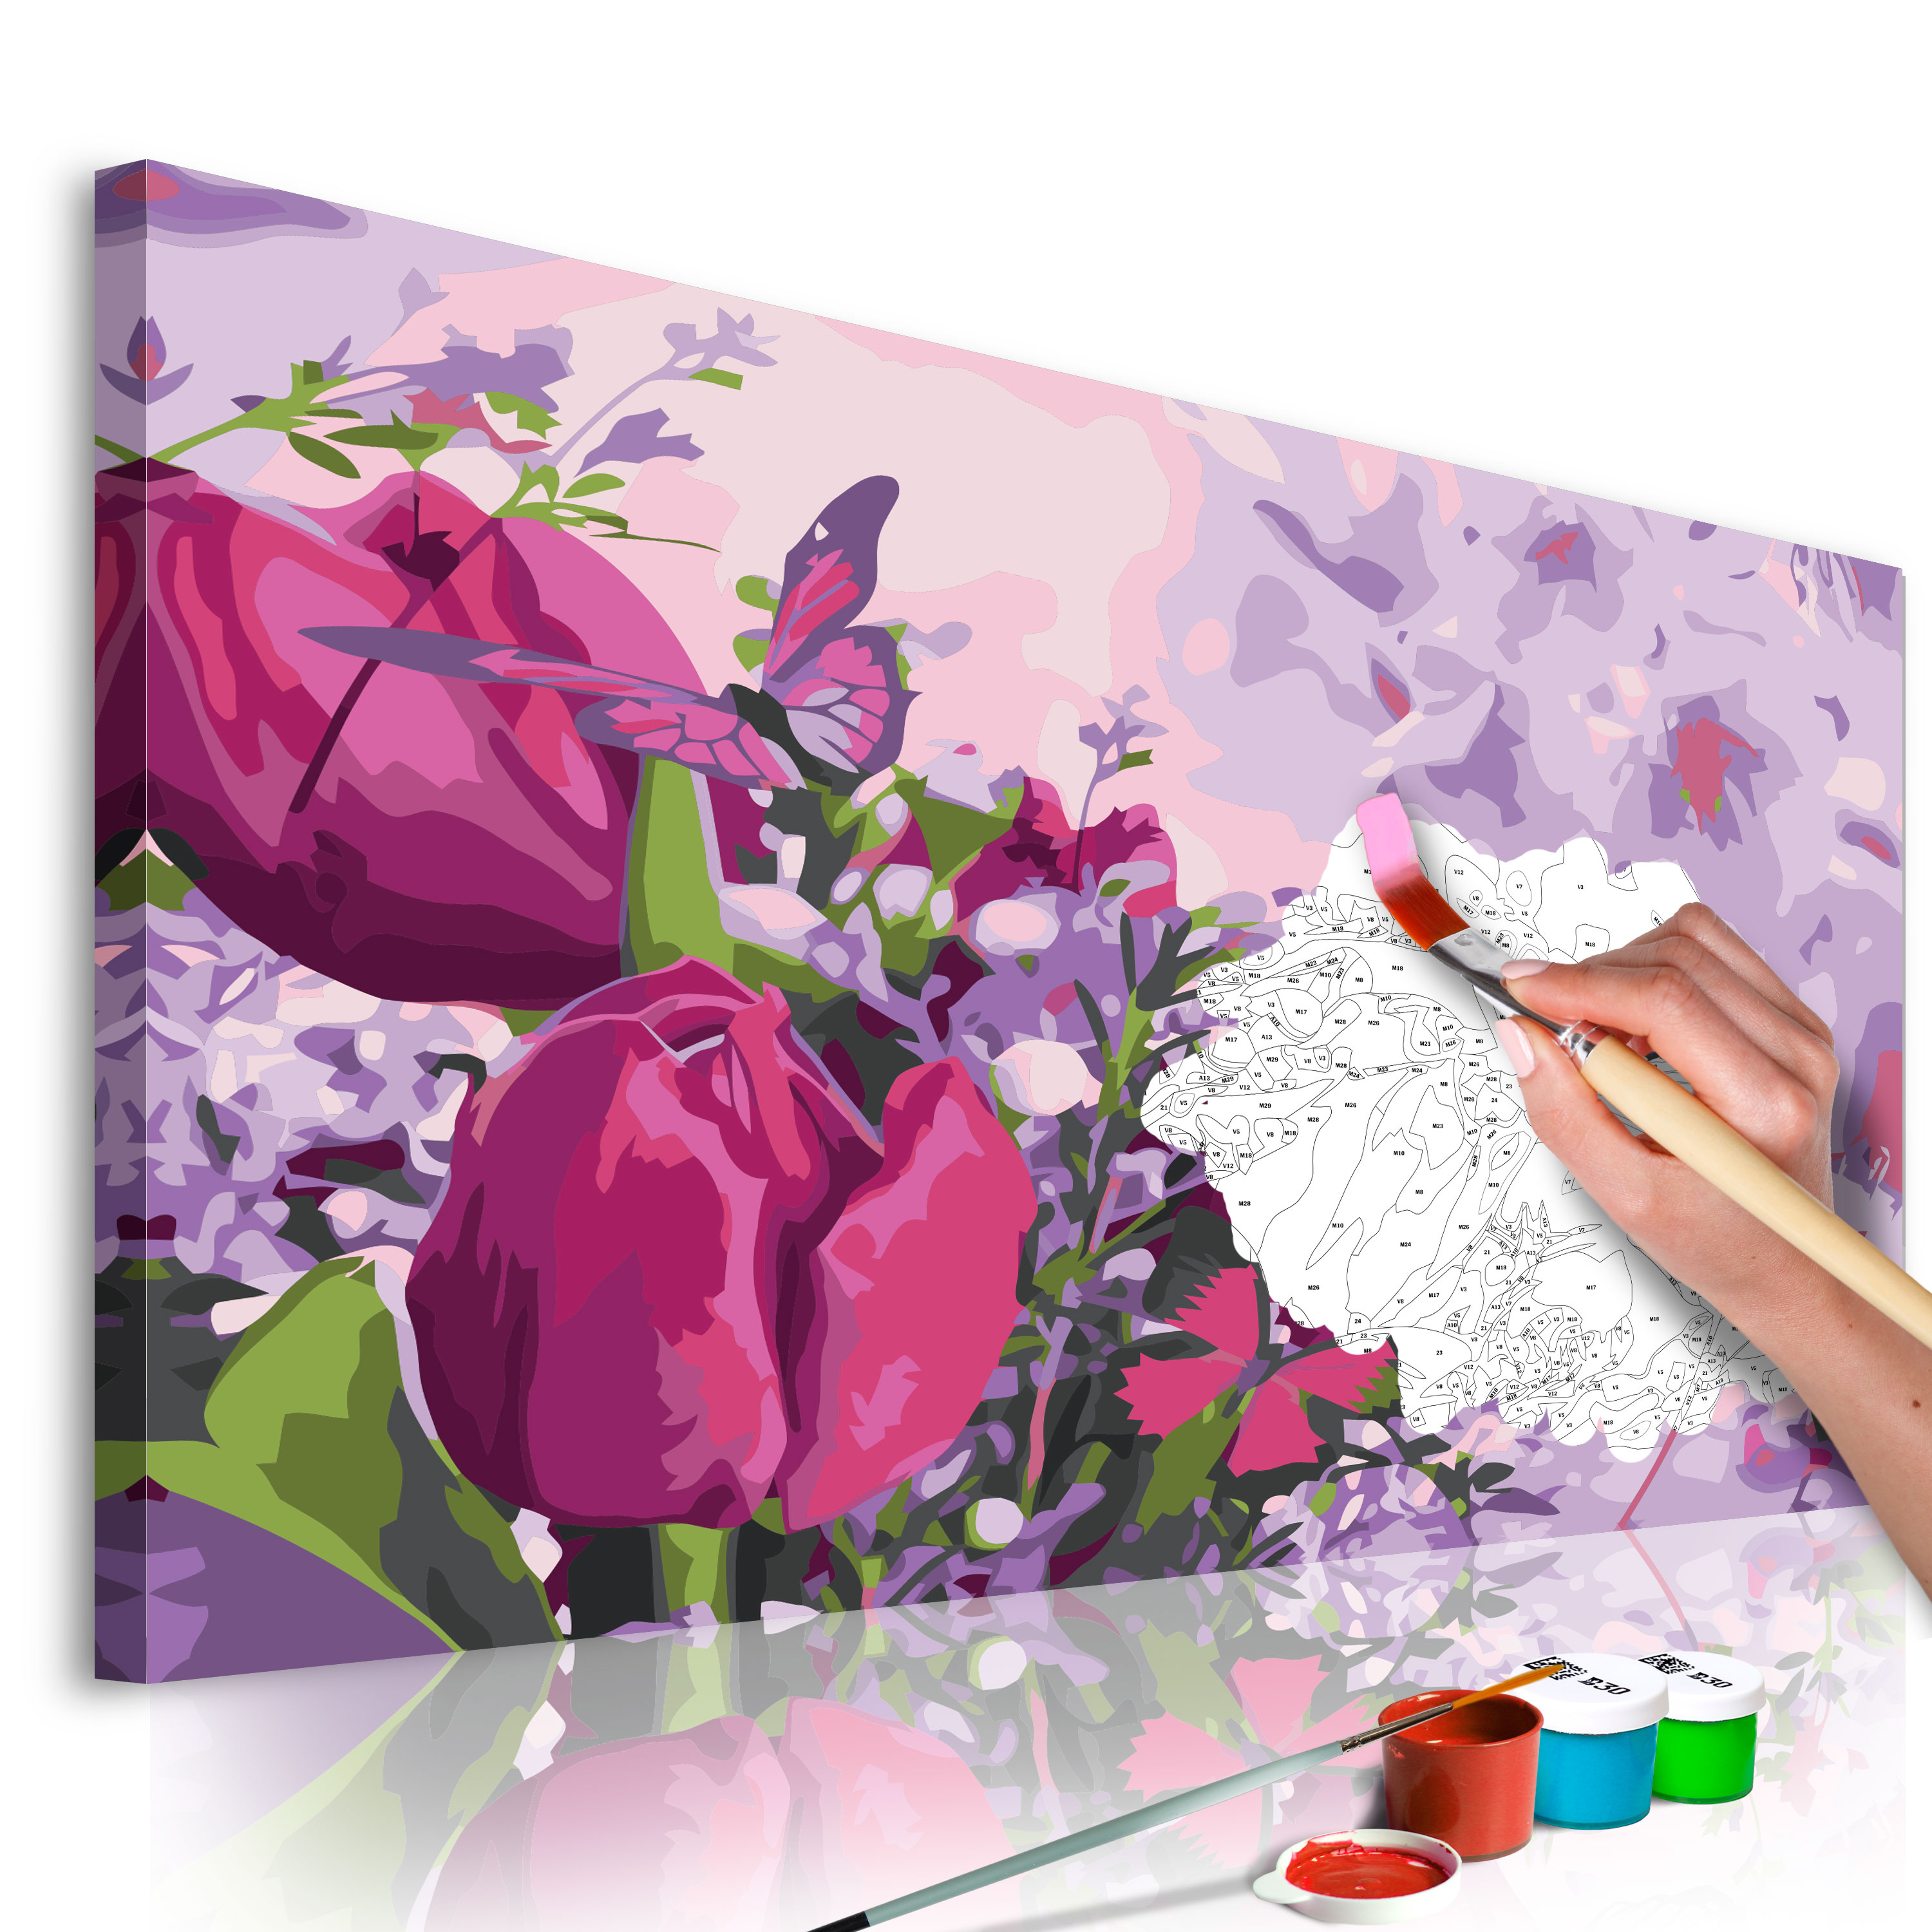 DIY canvas painting - Tulips (Meadow) - 60x40